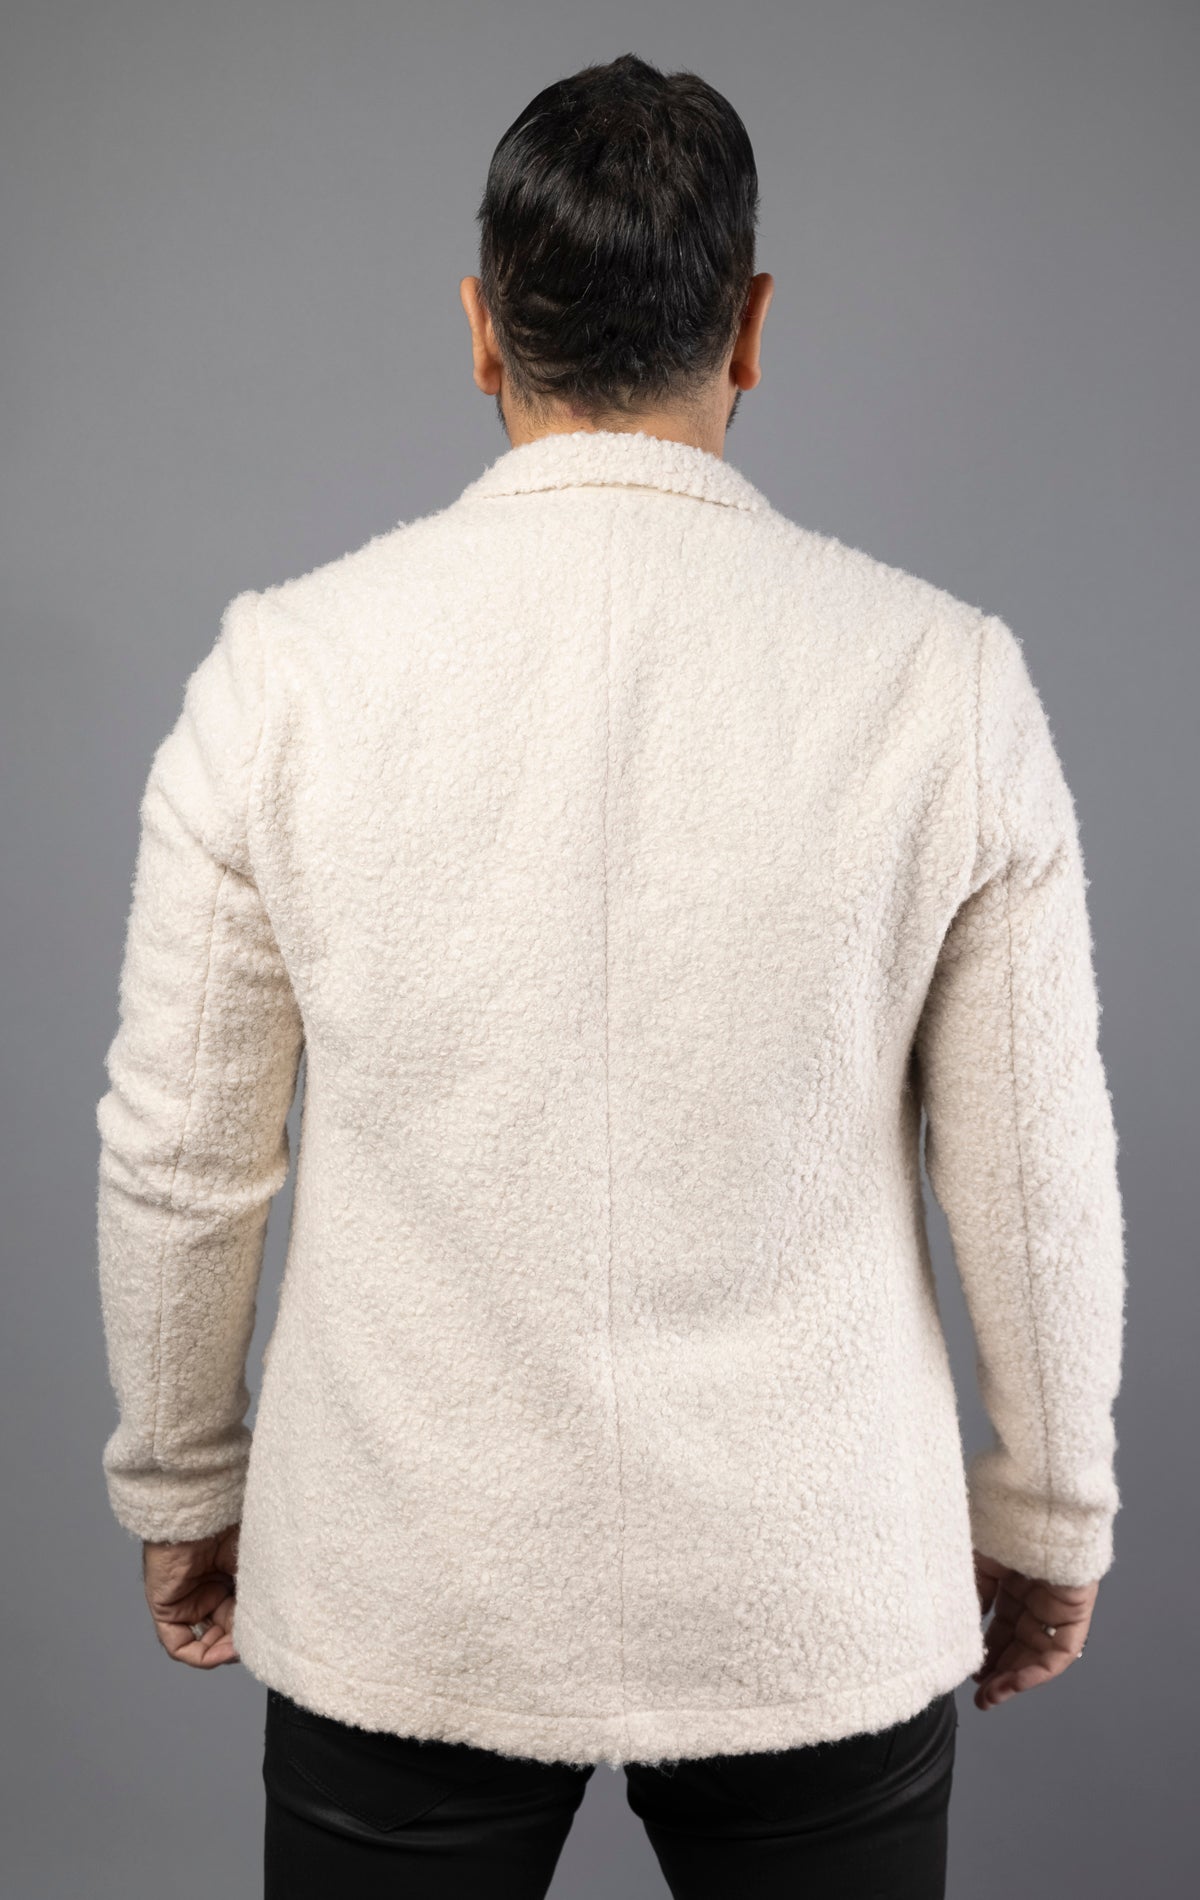 Beige overshirt boasts a faux teddy material and oversized fit, complete with a soft lining, and chest pockets.